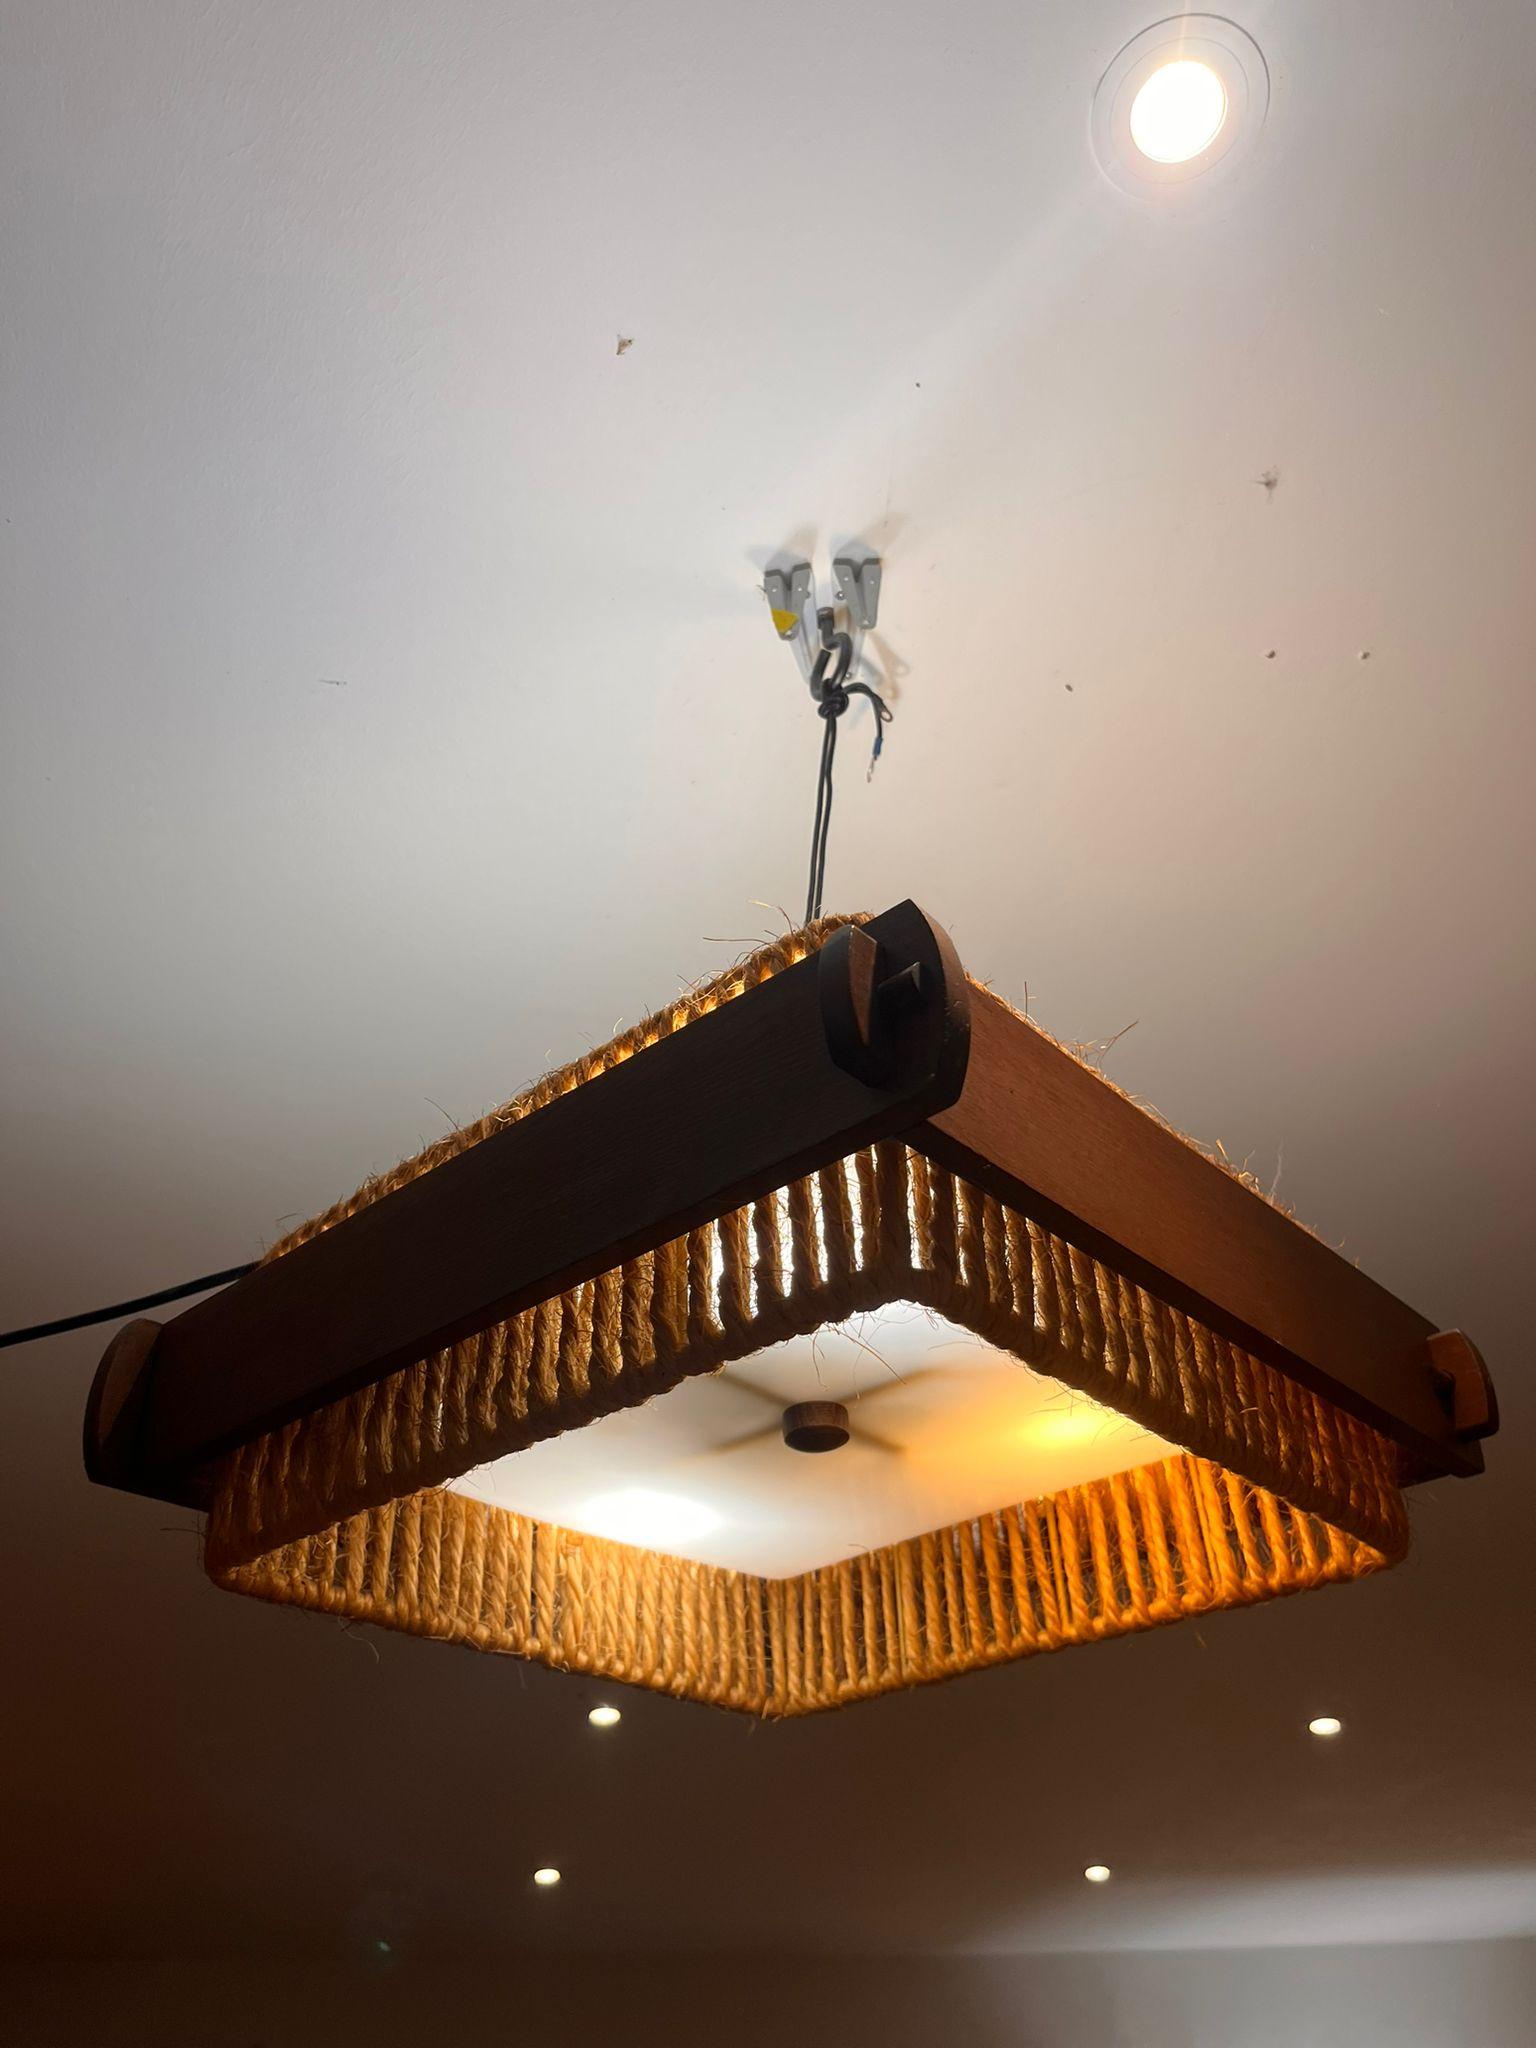 Acryl Wooden Ceiling Light from Temde

2 pieces available